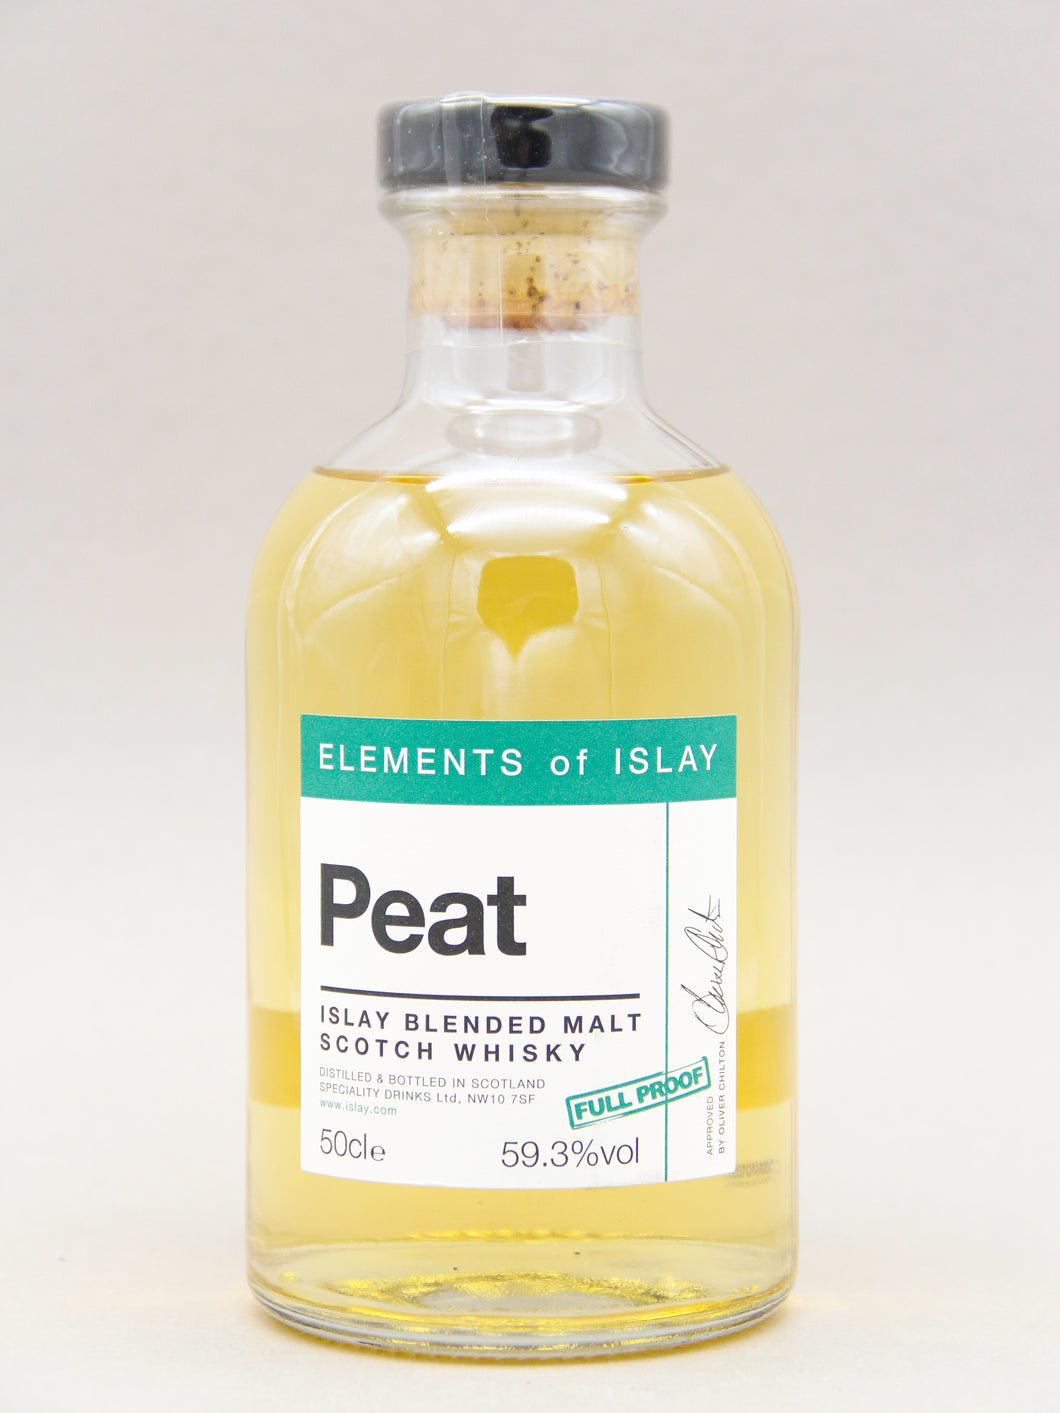 Elements of Islay Peat, Blended Malt, Full Proof (59.3%, 50cl)